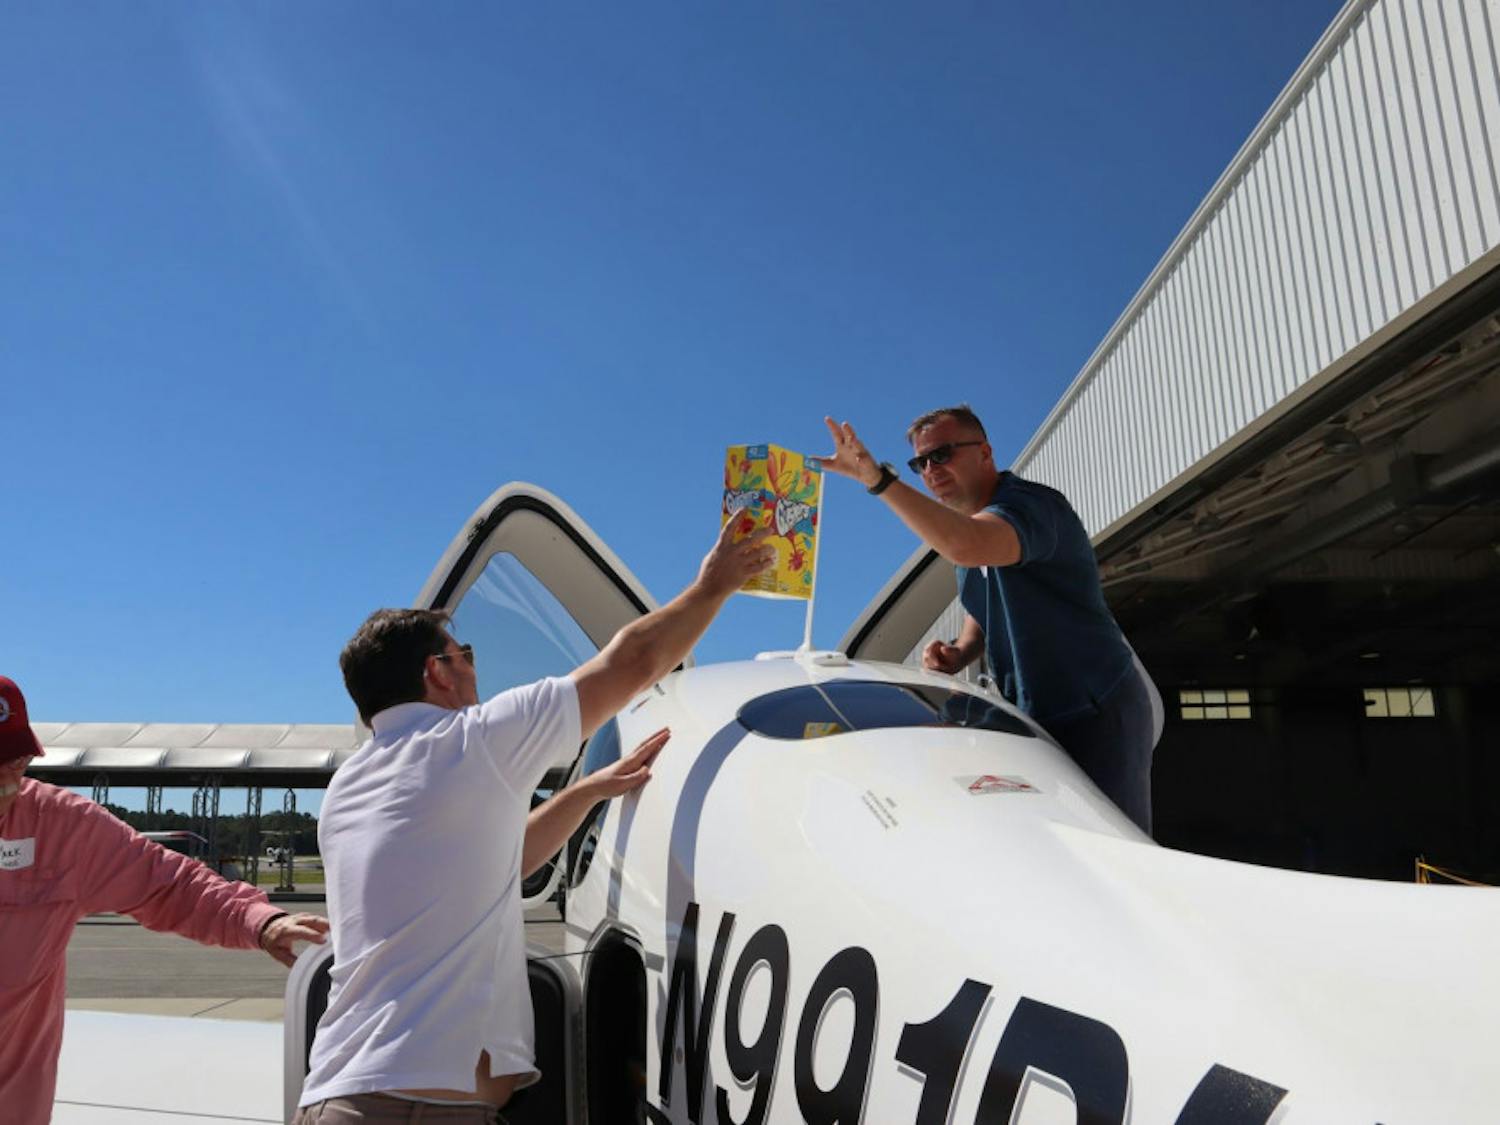 Volunteers load a private plane from West Palm Beach with supplies for people in the Florida Panhandle. One organizer of the relief effort, Debbie Frederick, who is the Chief Operating Officer of University Aircenter, said the planes are the first to get to areas cut off because roads are impassable. “They’re the boots in the air,” she said.